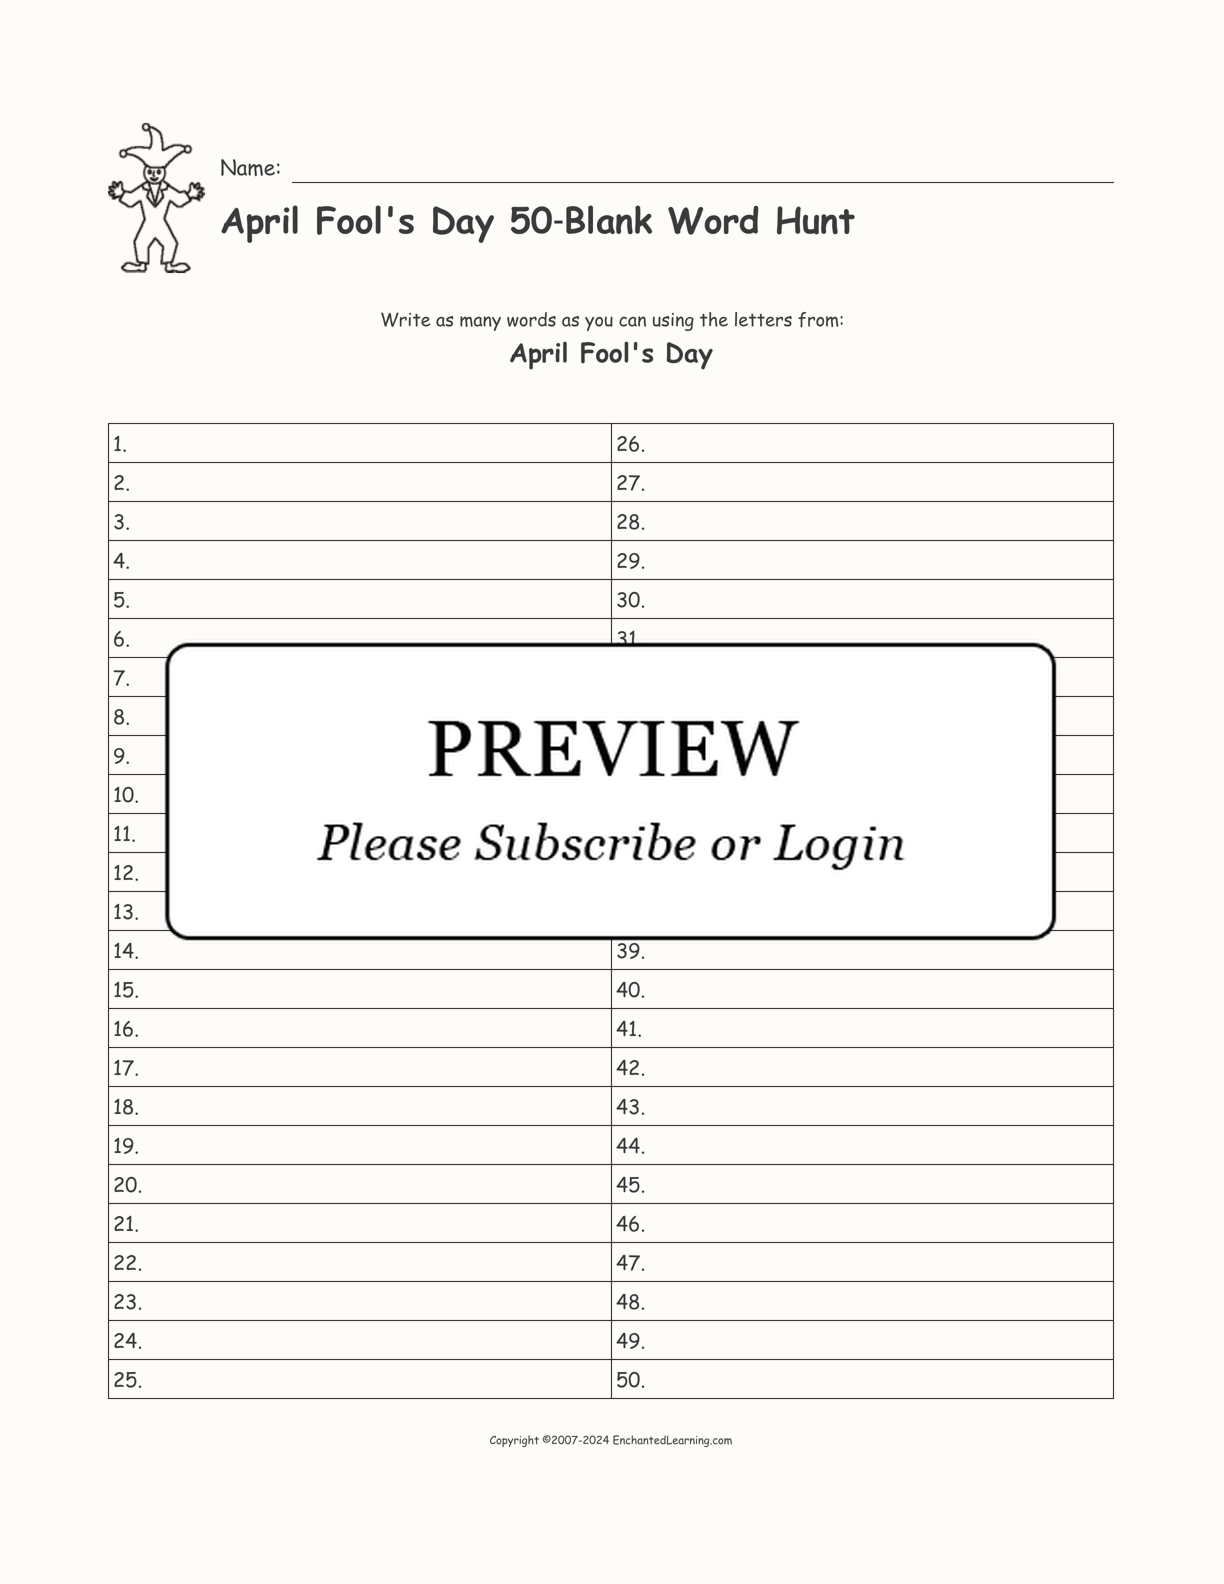 April Fool's Day 50‑Blank Word Hunt interactive worksheet page 1